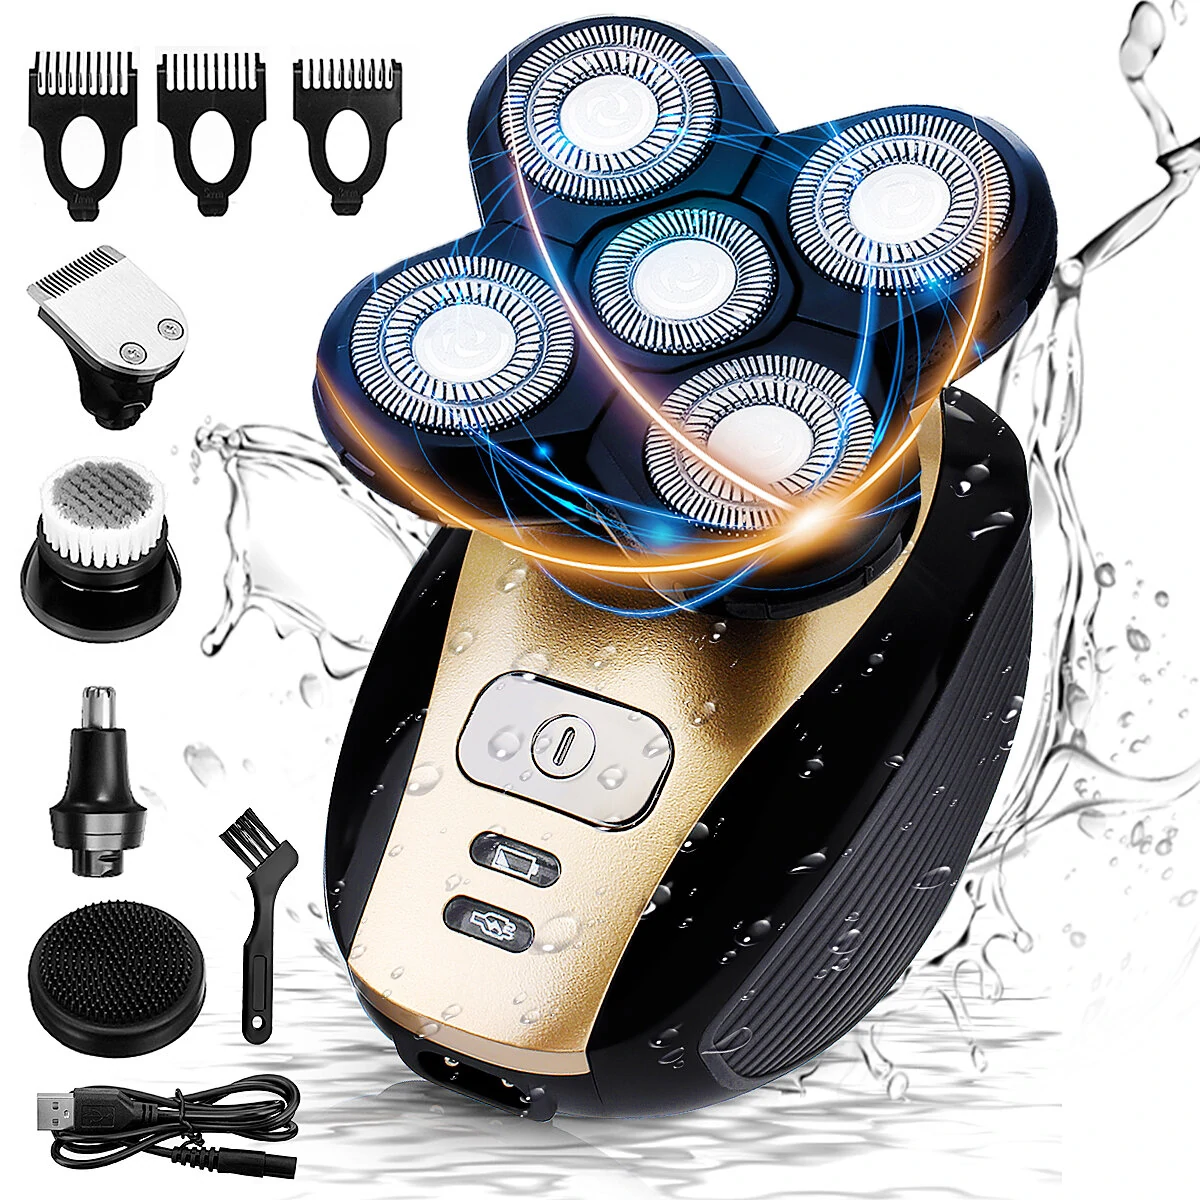 5 in 1 Electric Razor for Men Bald Head Shaver USB Rechargeable Beard Hair Grooming Kit